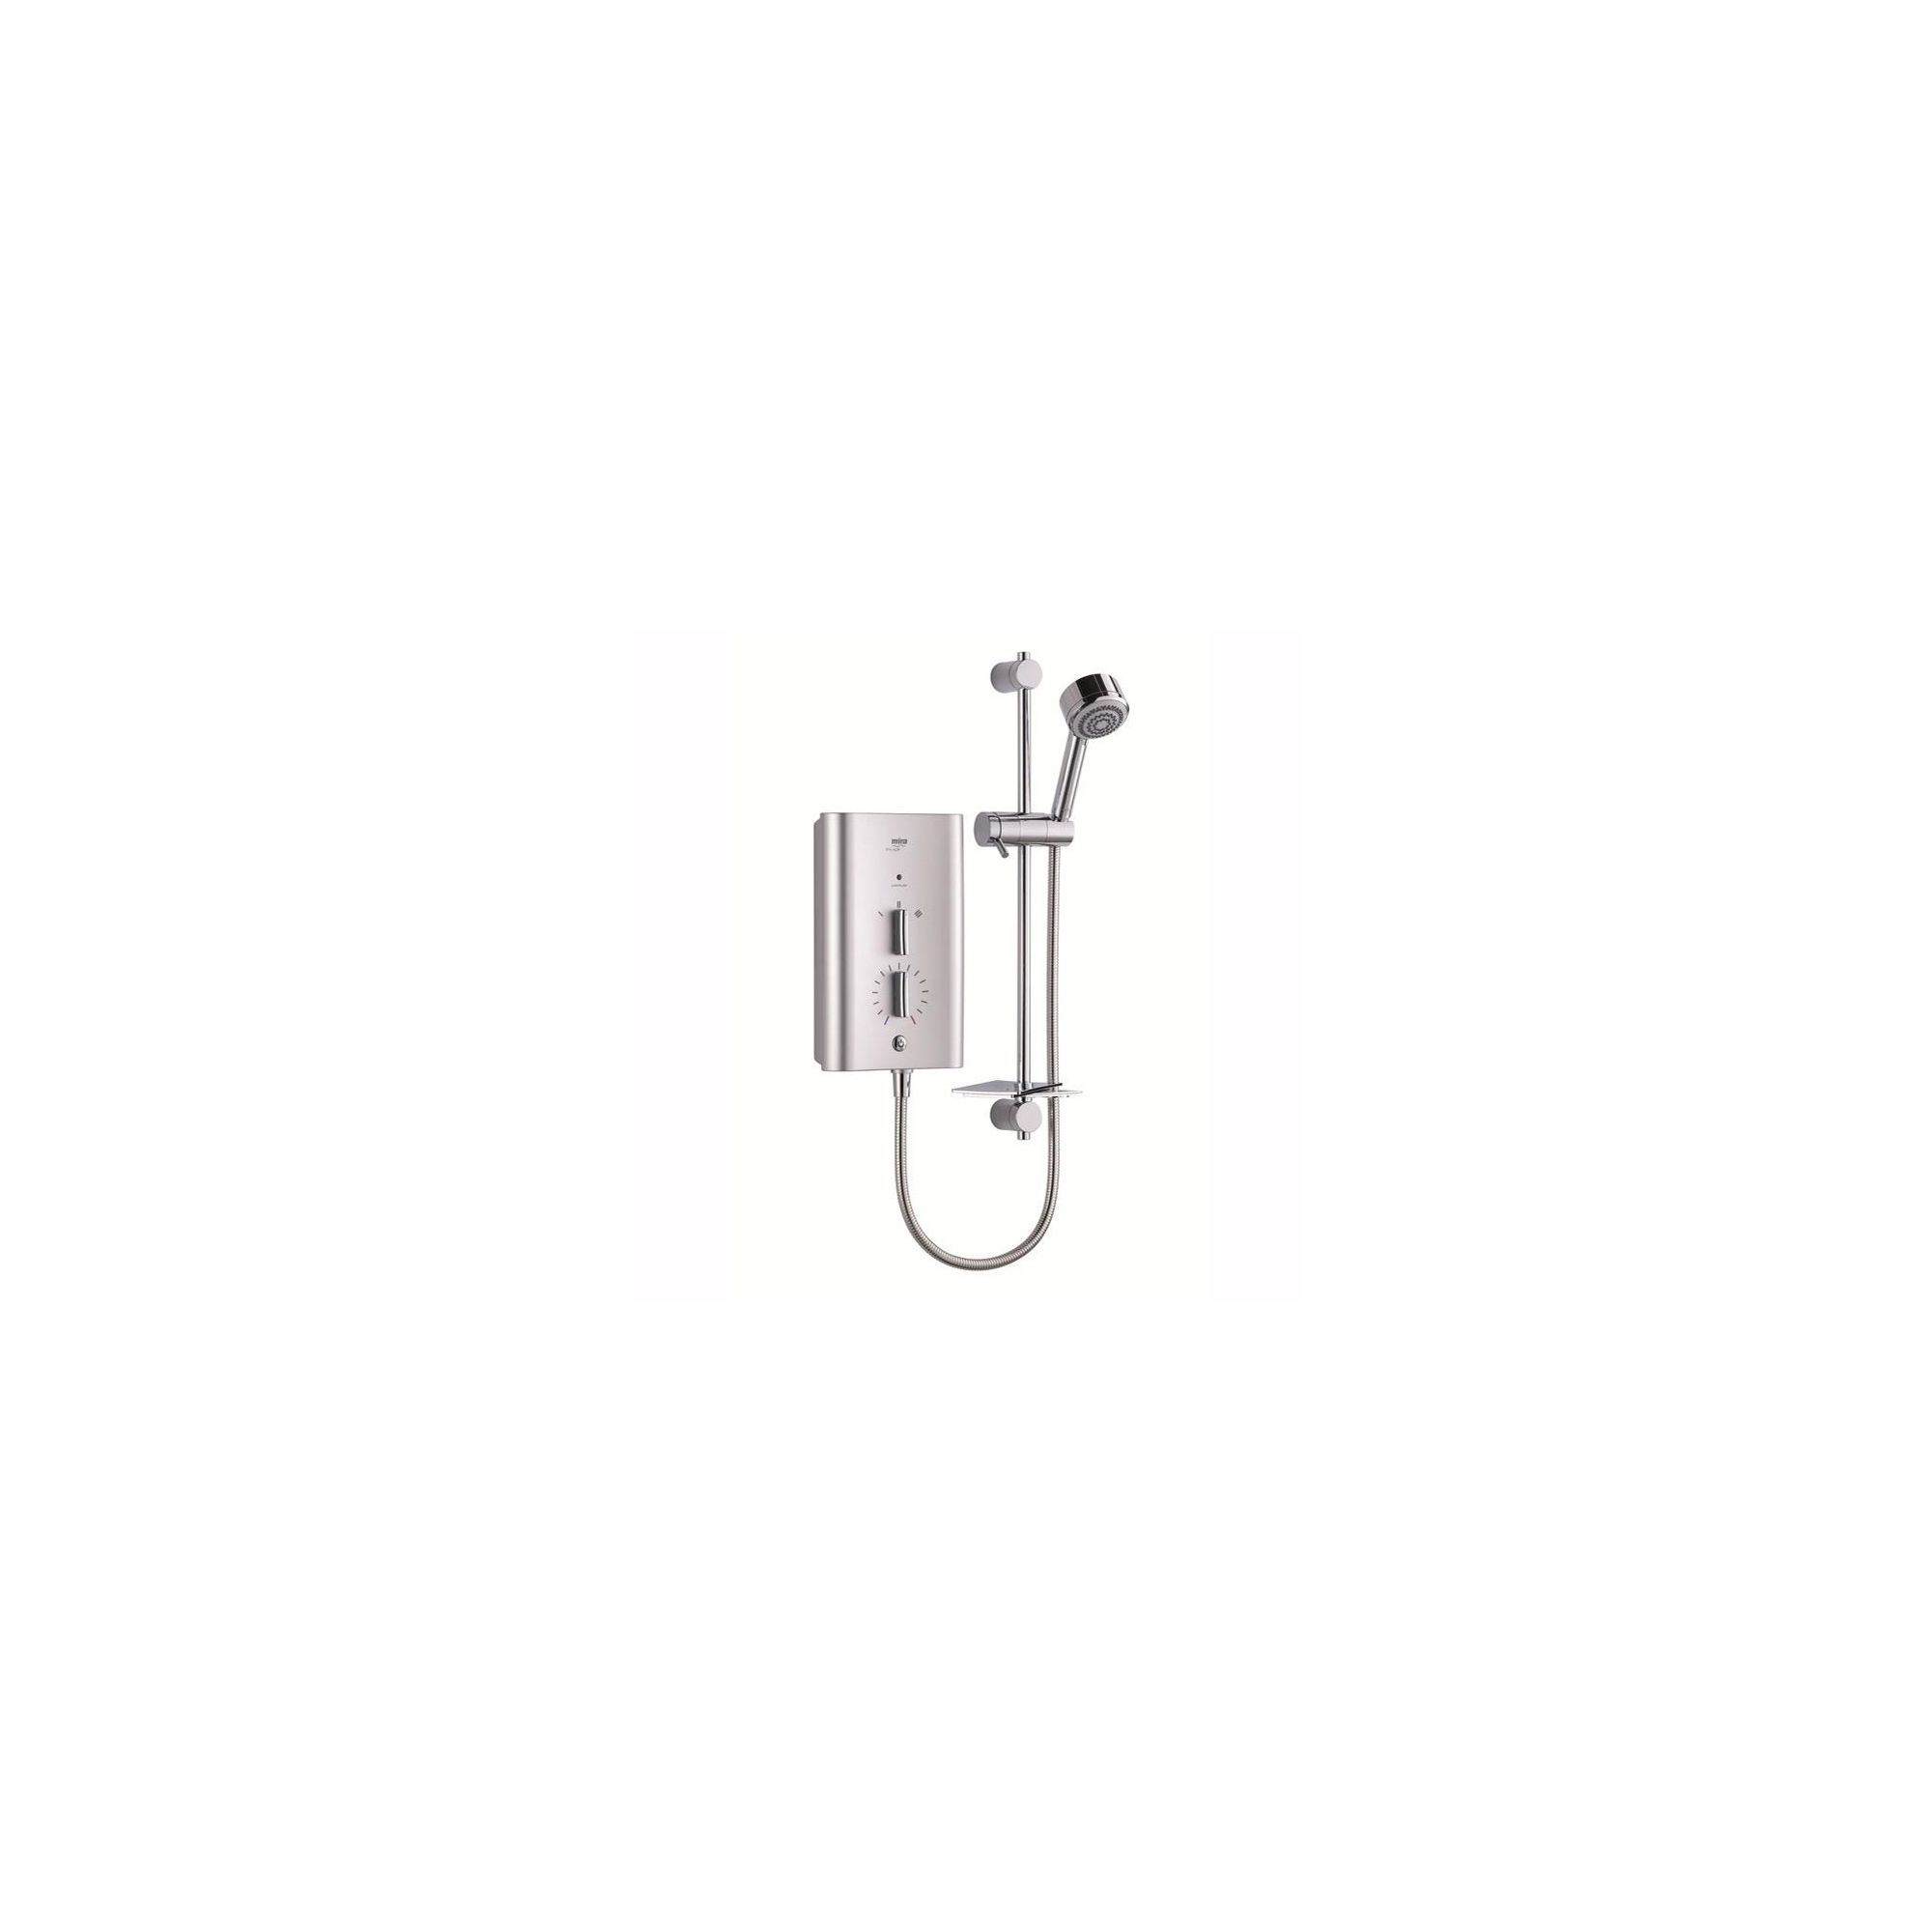 Mira Escape 9.0 kW Electric Shower with 4 Spray Handshower, Satin Chrome at Tesco Direct